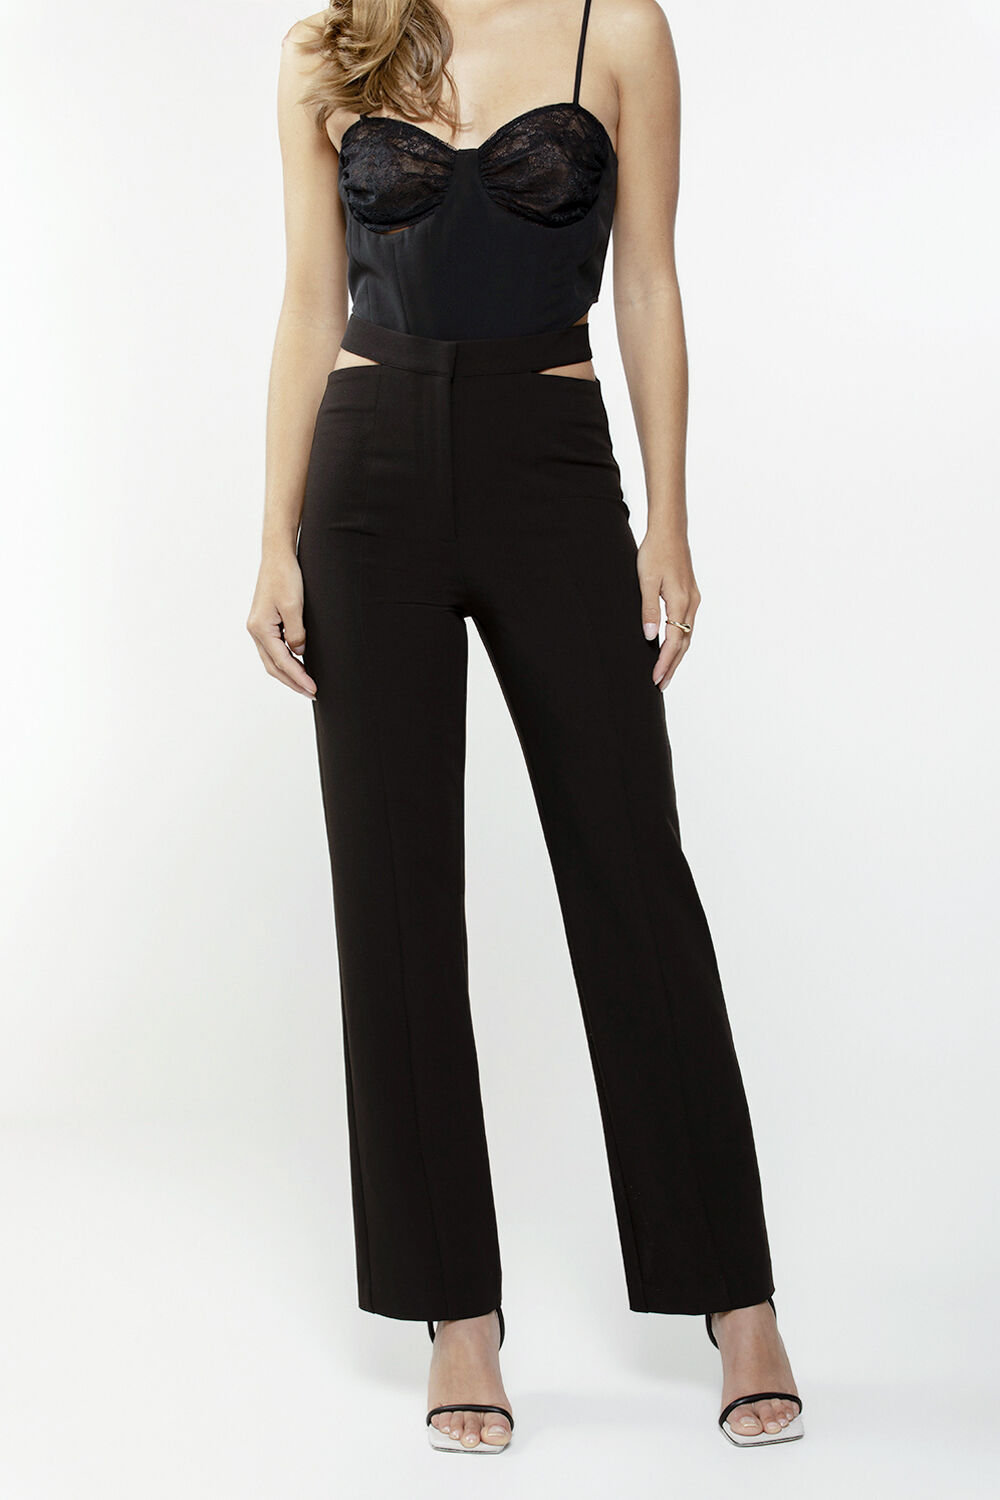 KYLIE CUT OUT PANT in colour CAVIAR